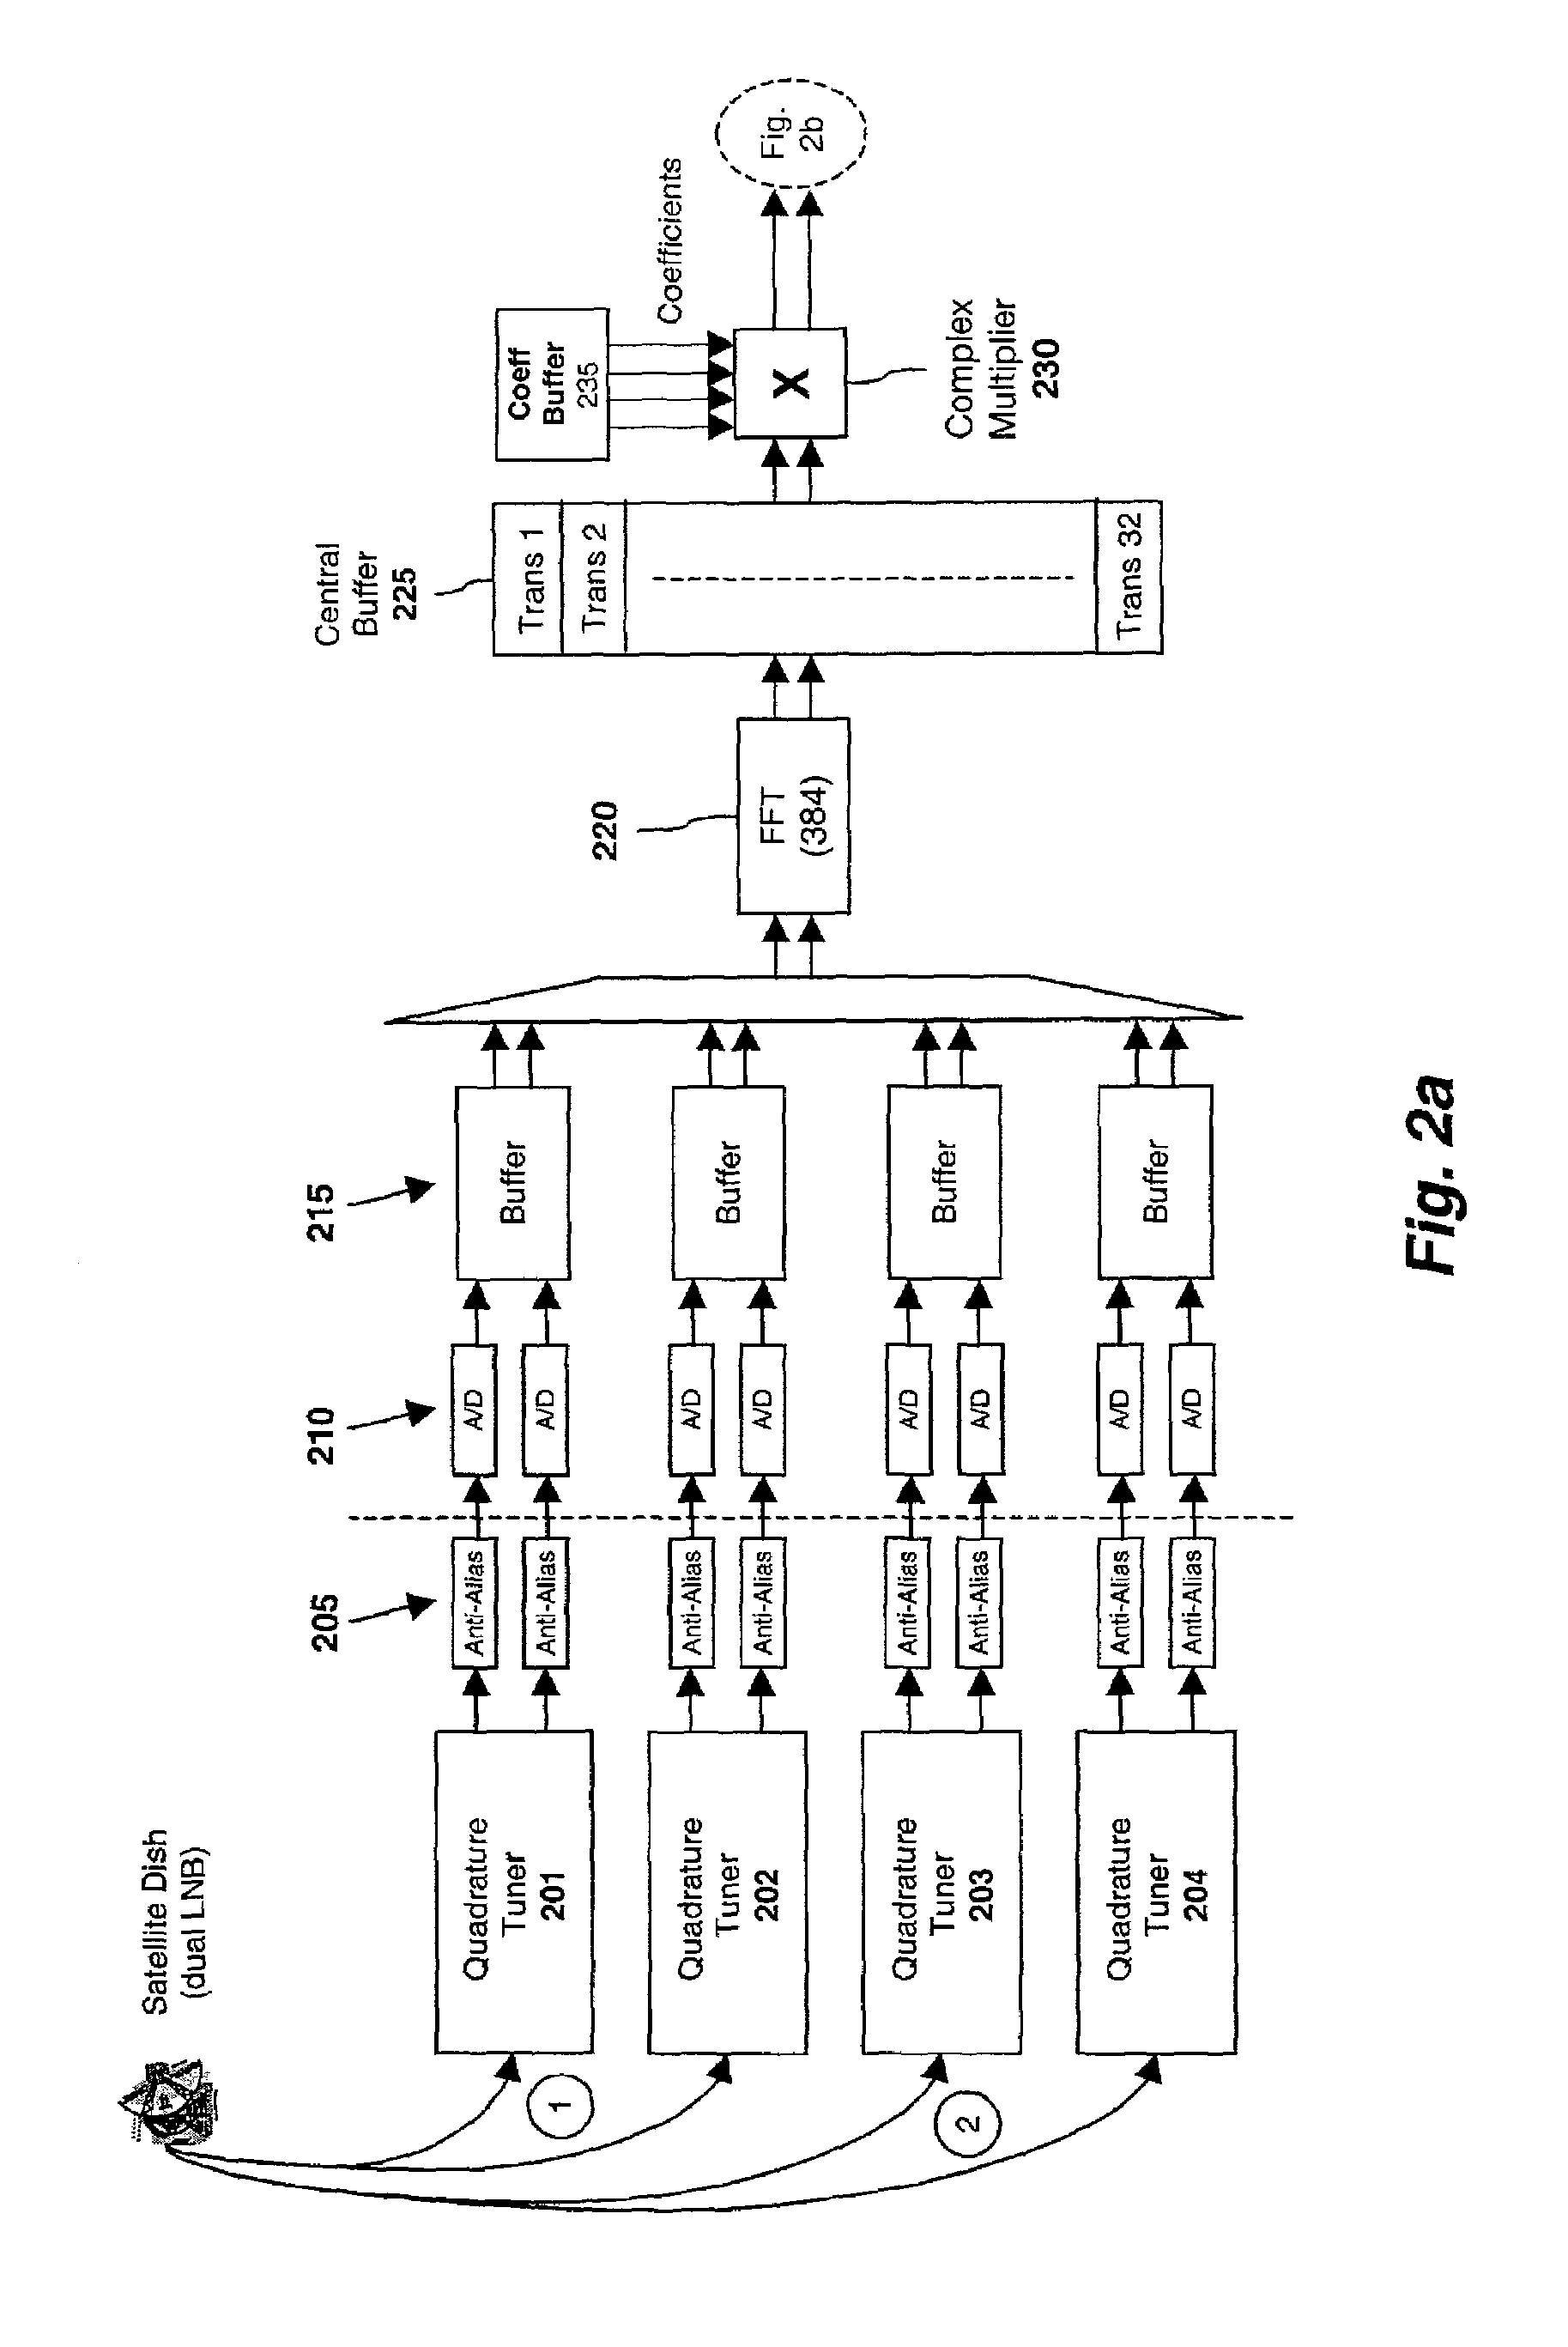 Apparatus and method for correcting signal imbalances using complex multiplication